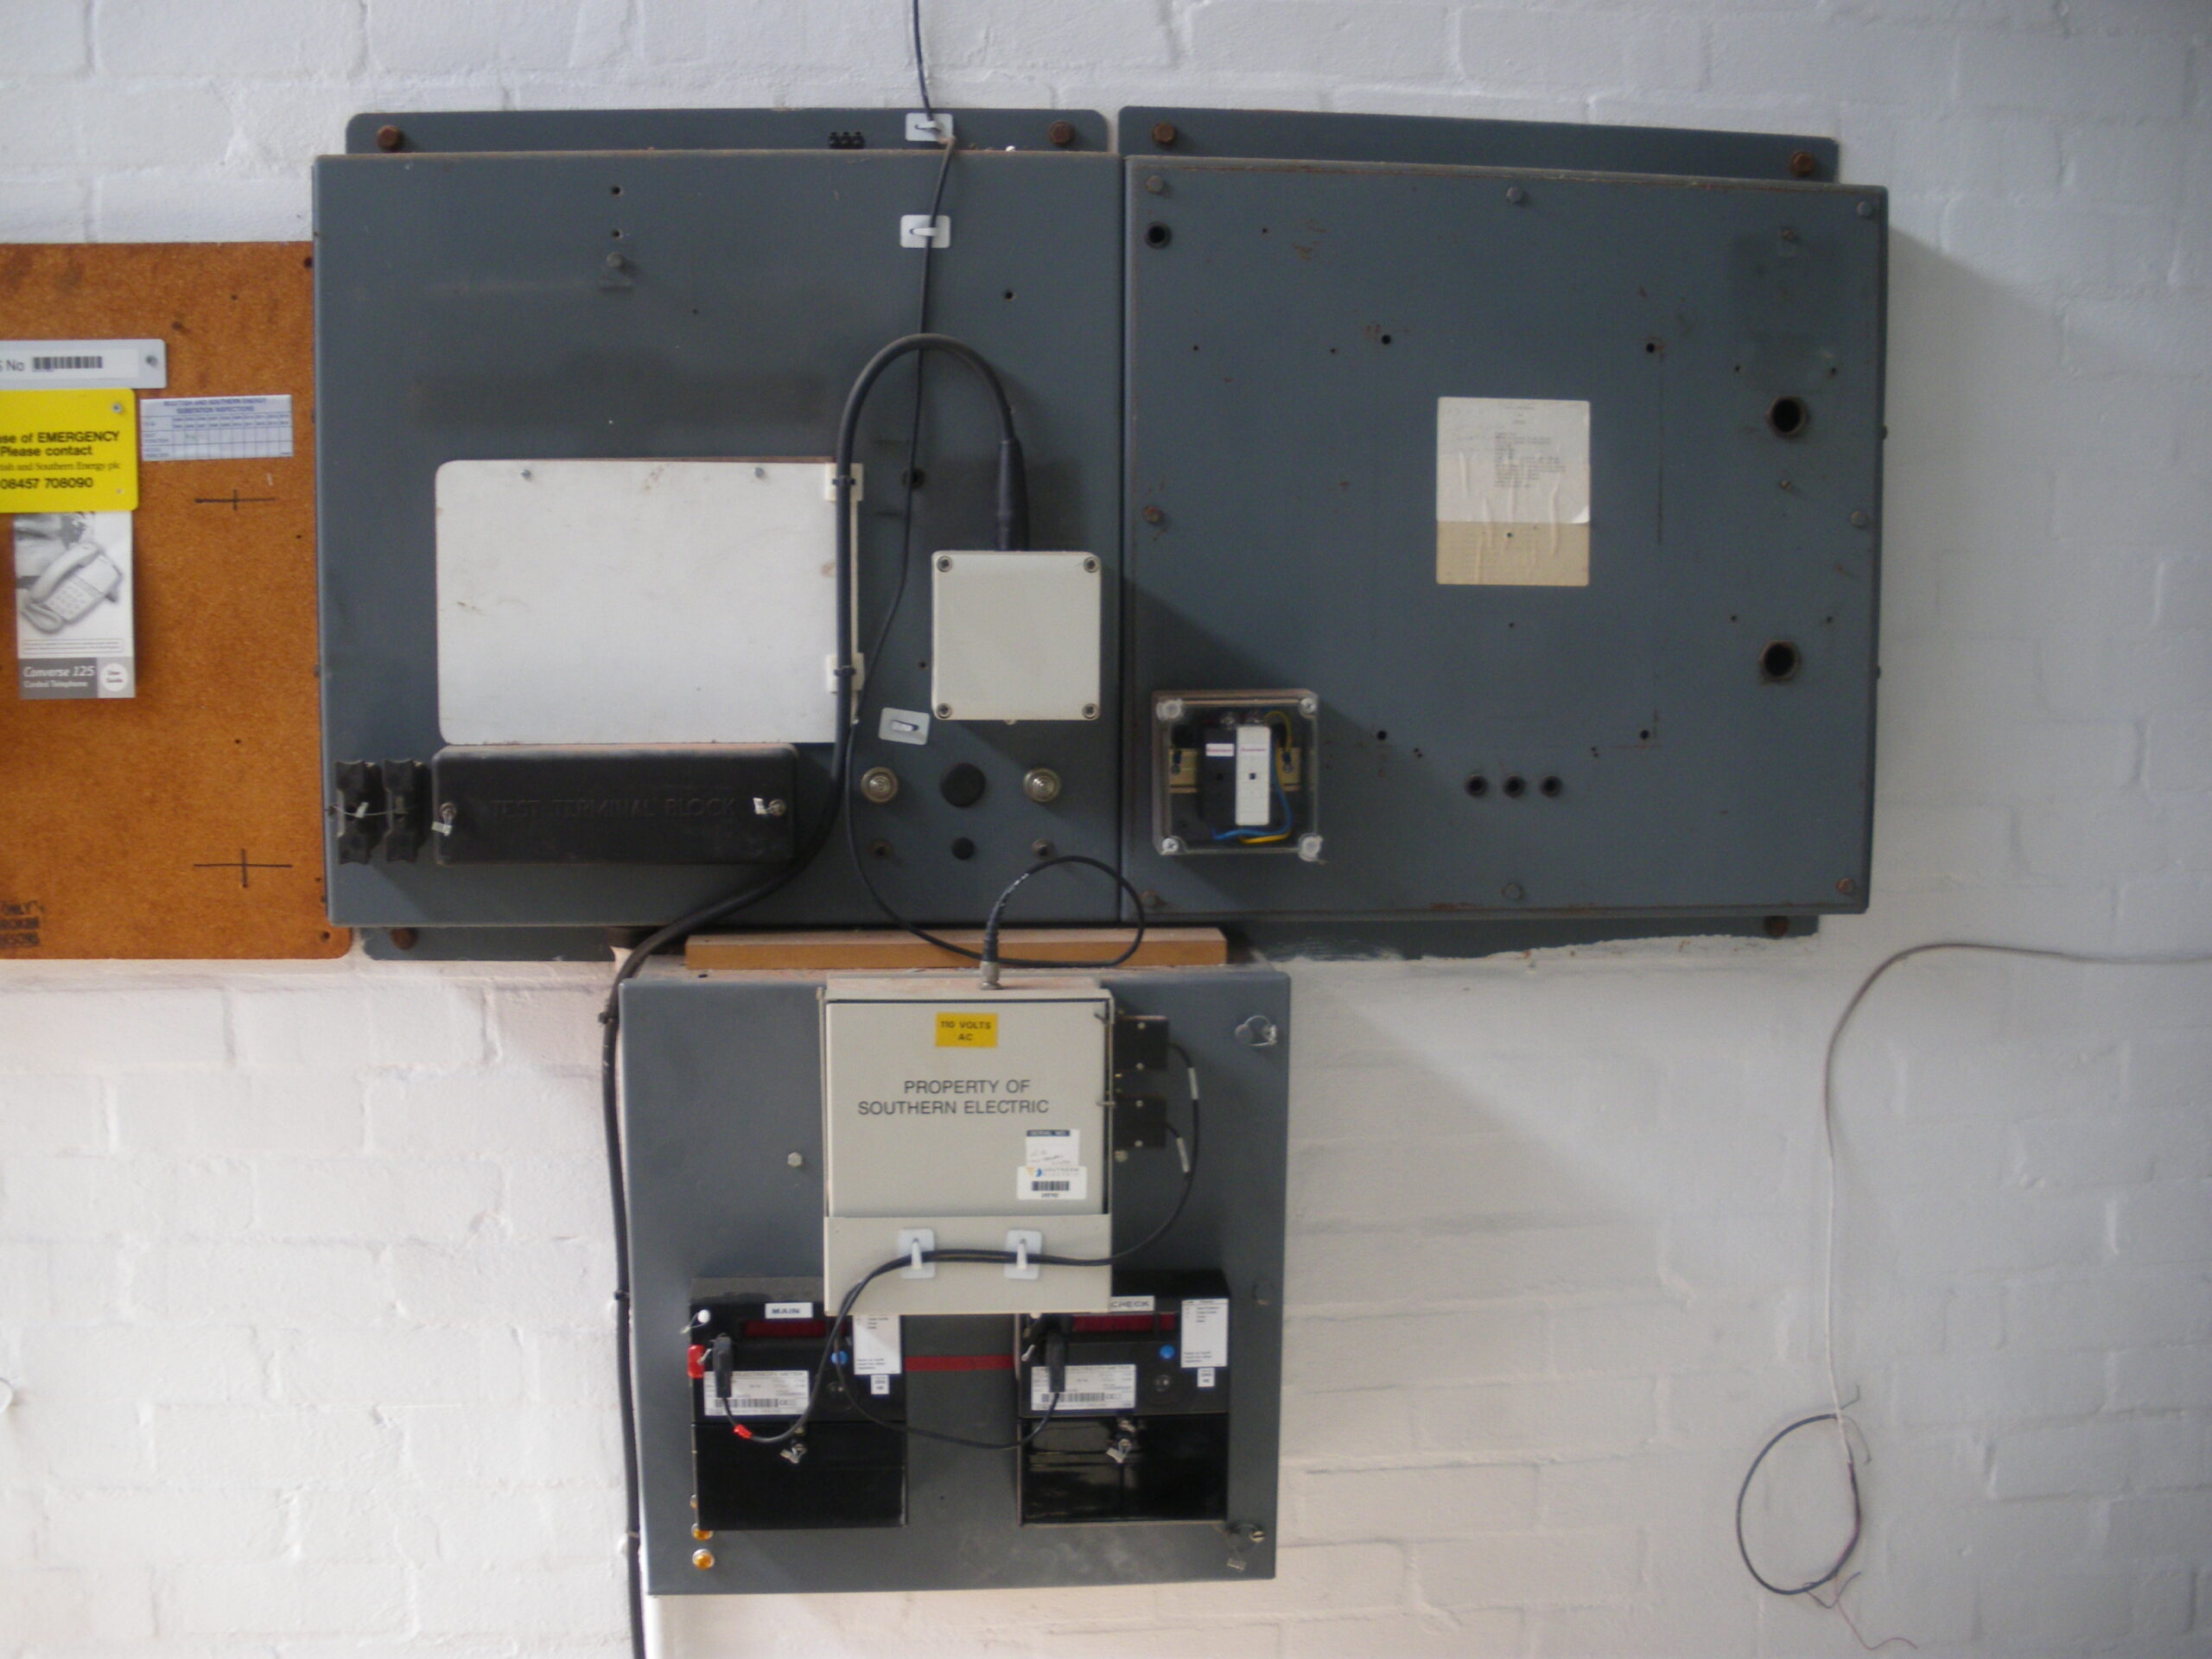 Substation - main electricity meter